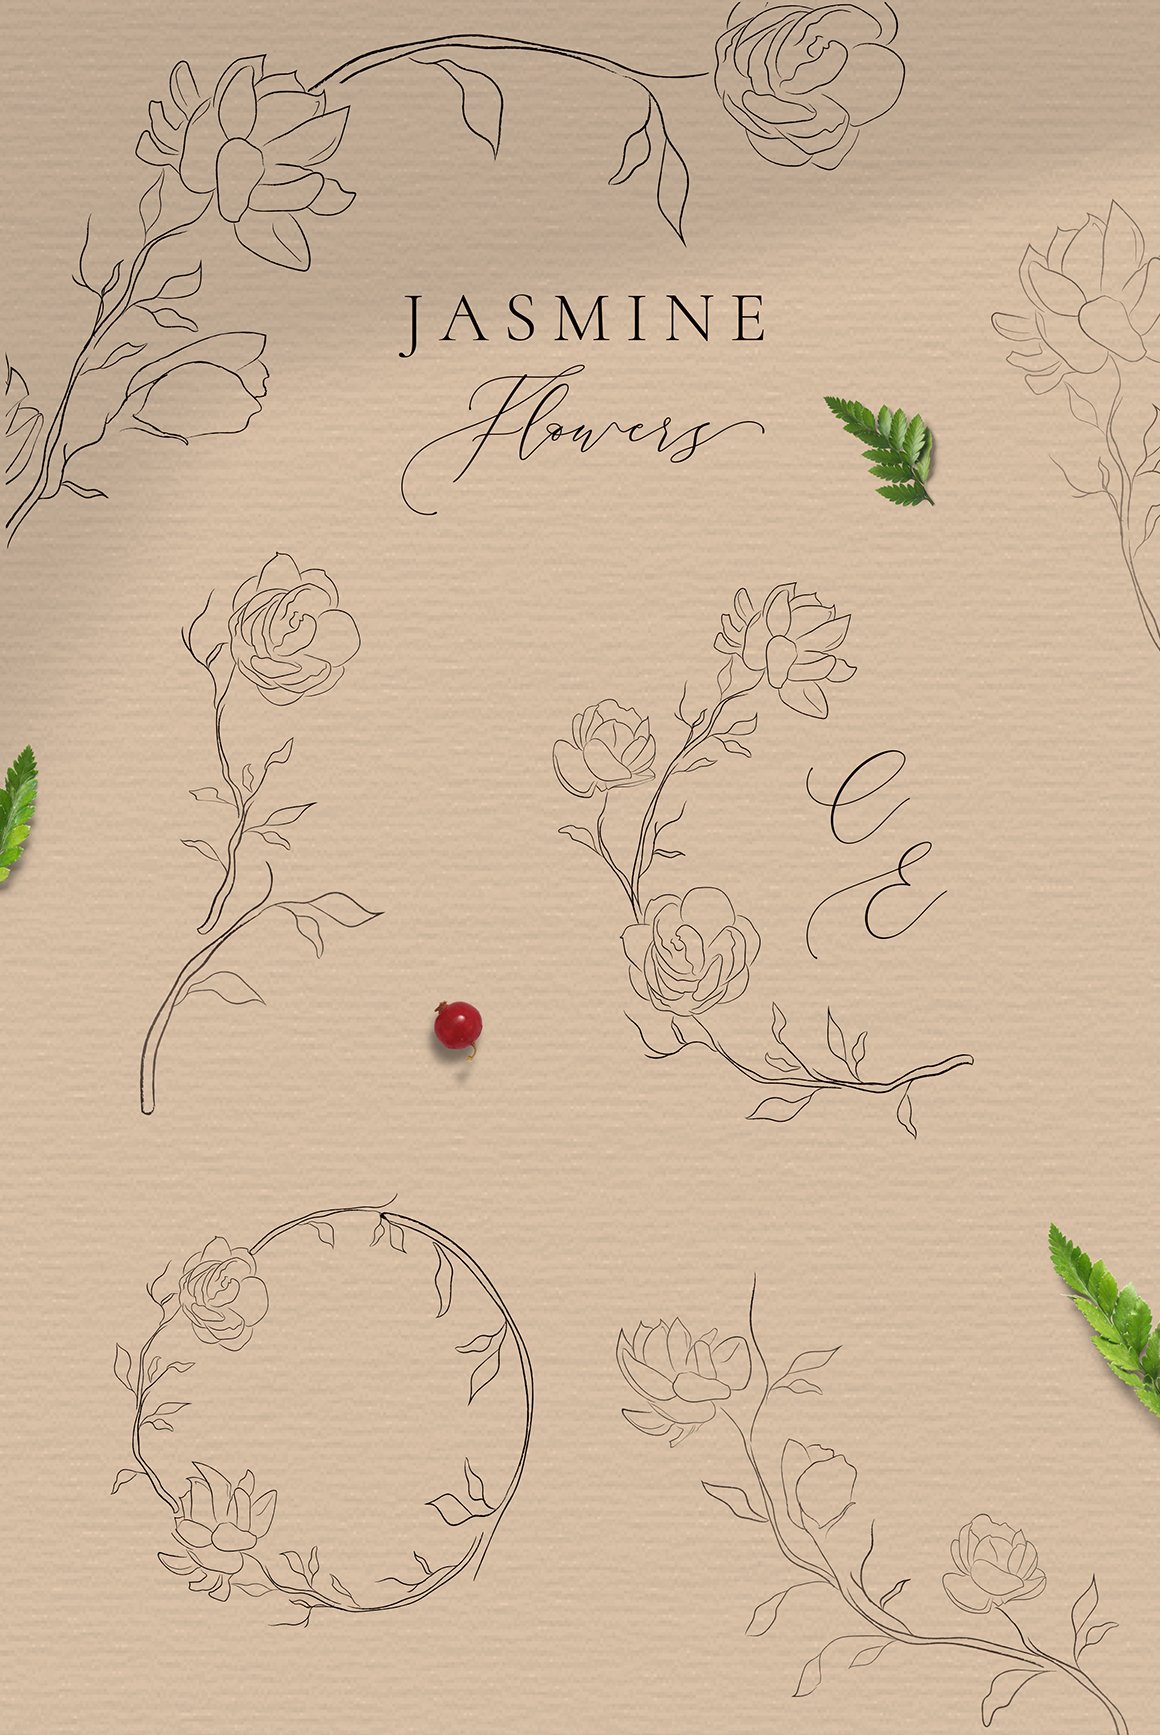 How To Draw A Jasmine, Step by Step, Drawing Guide, by Dawn - DragoArt